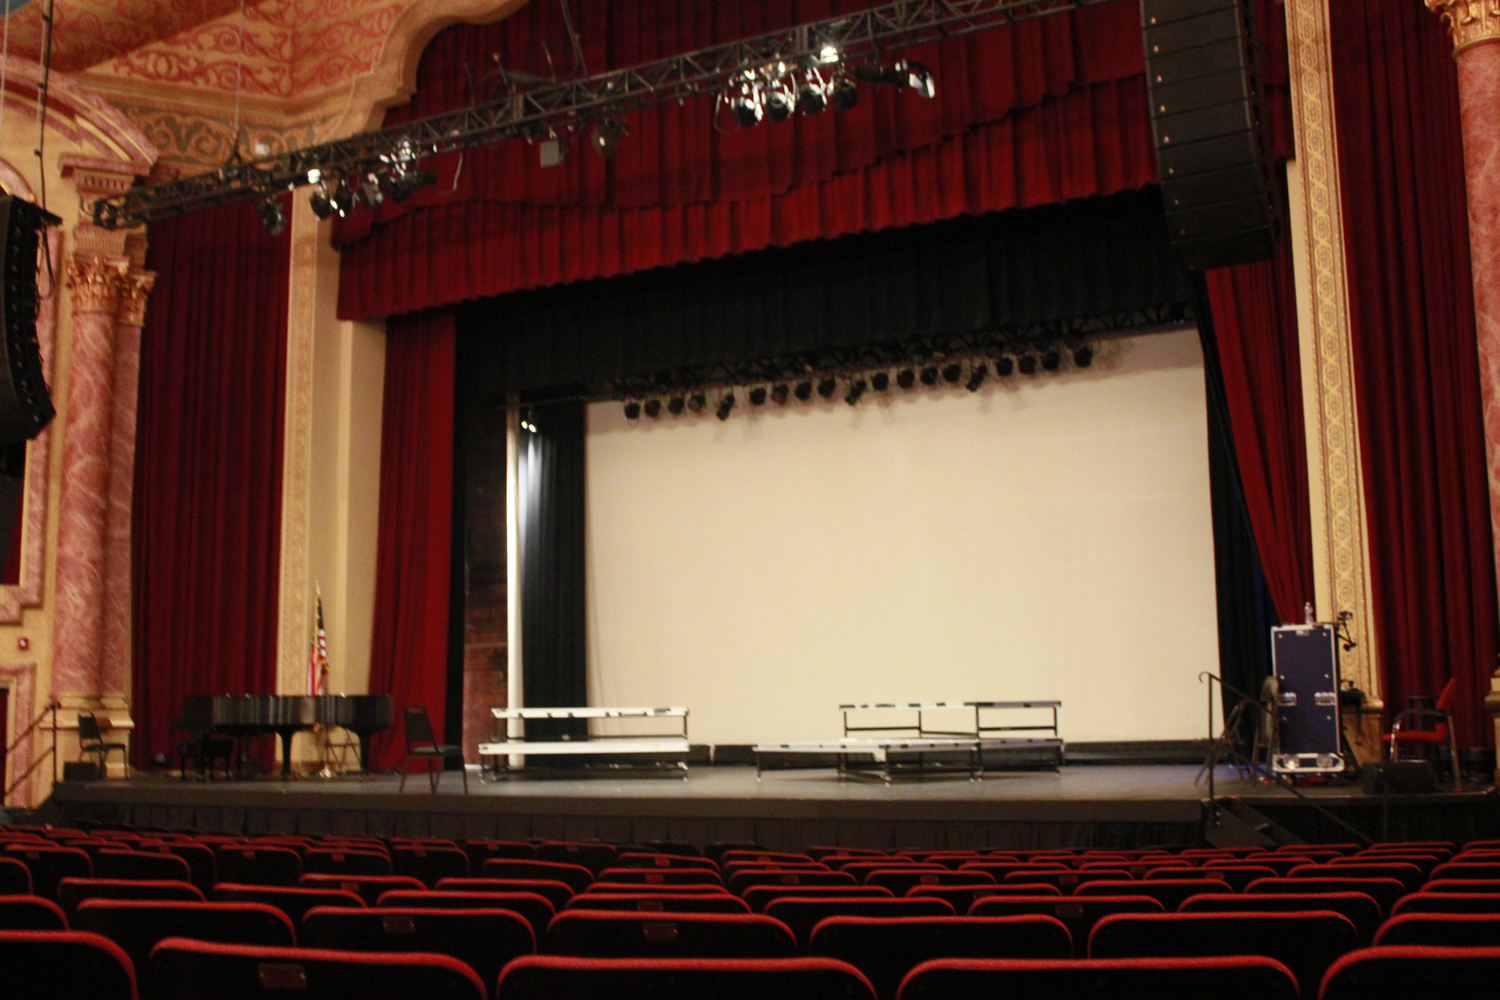 Forestburgh Playhouse Seating Chart